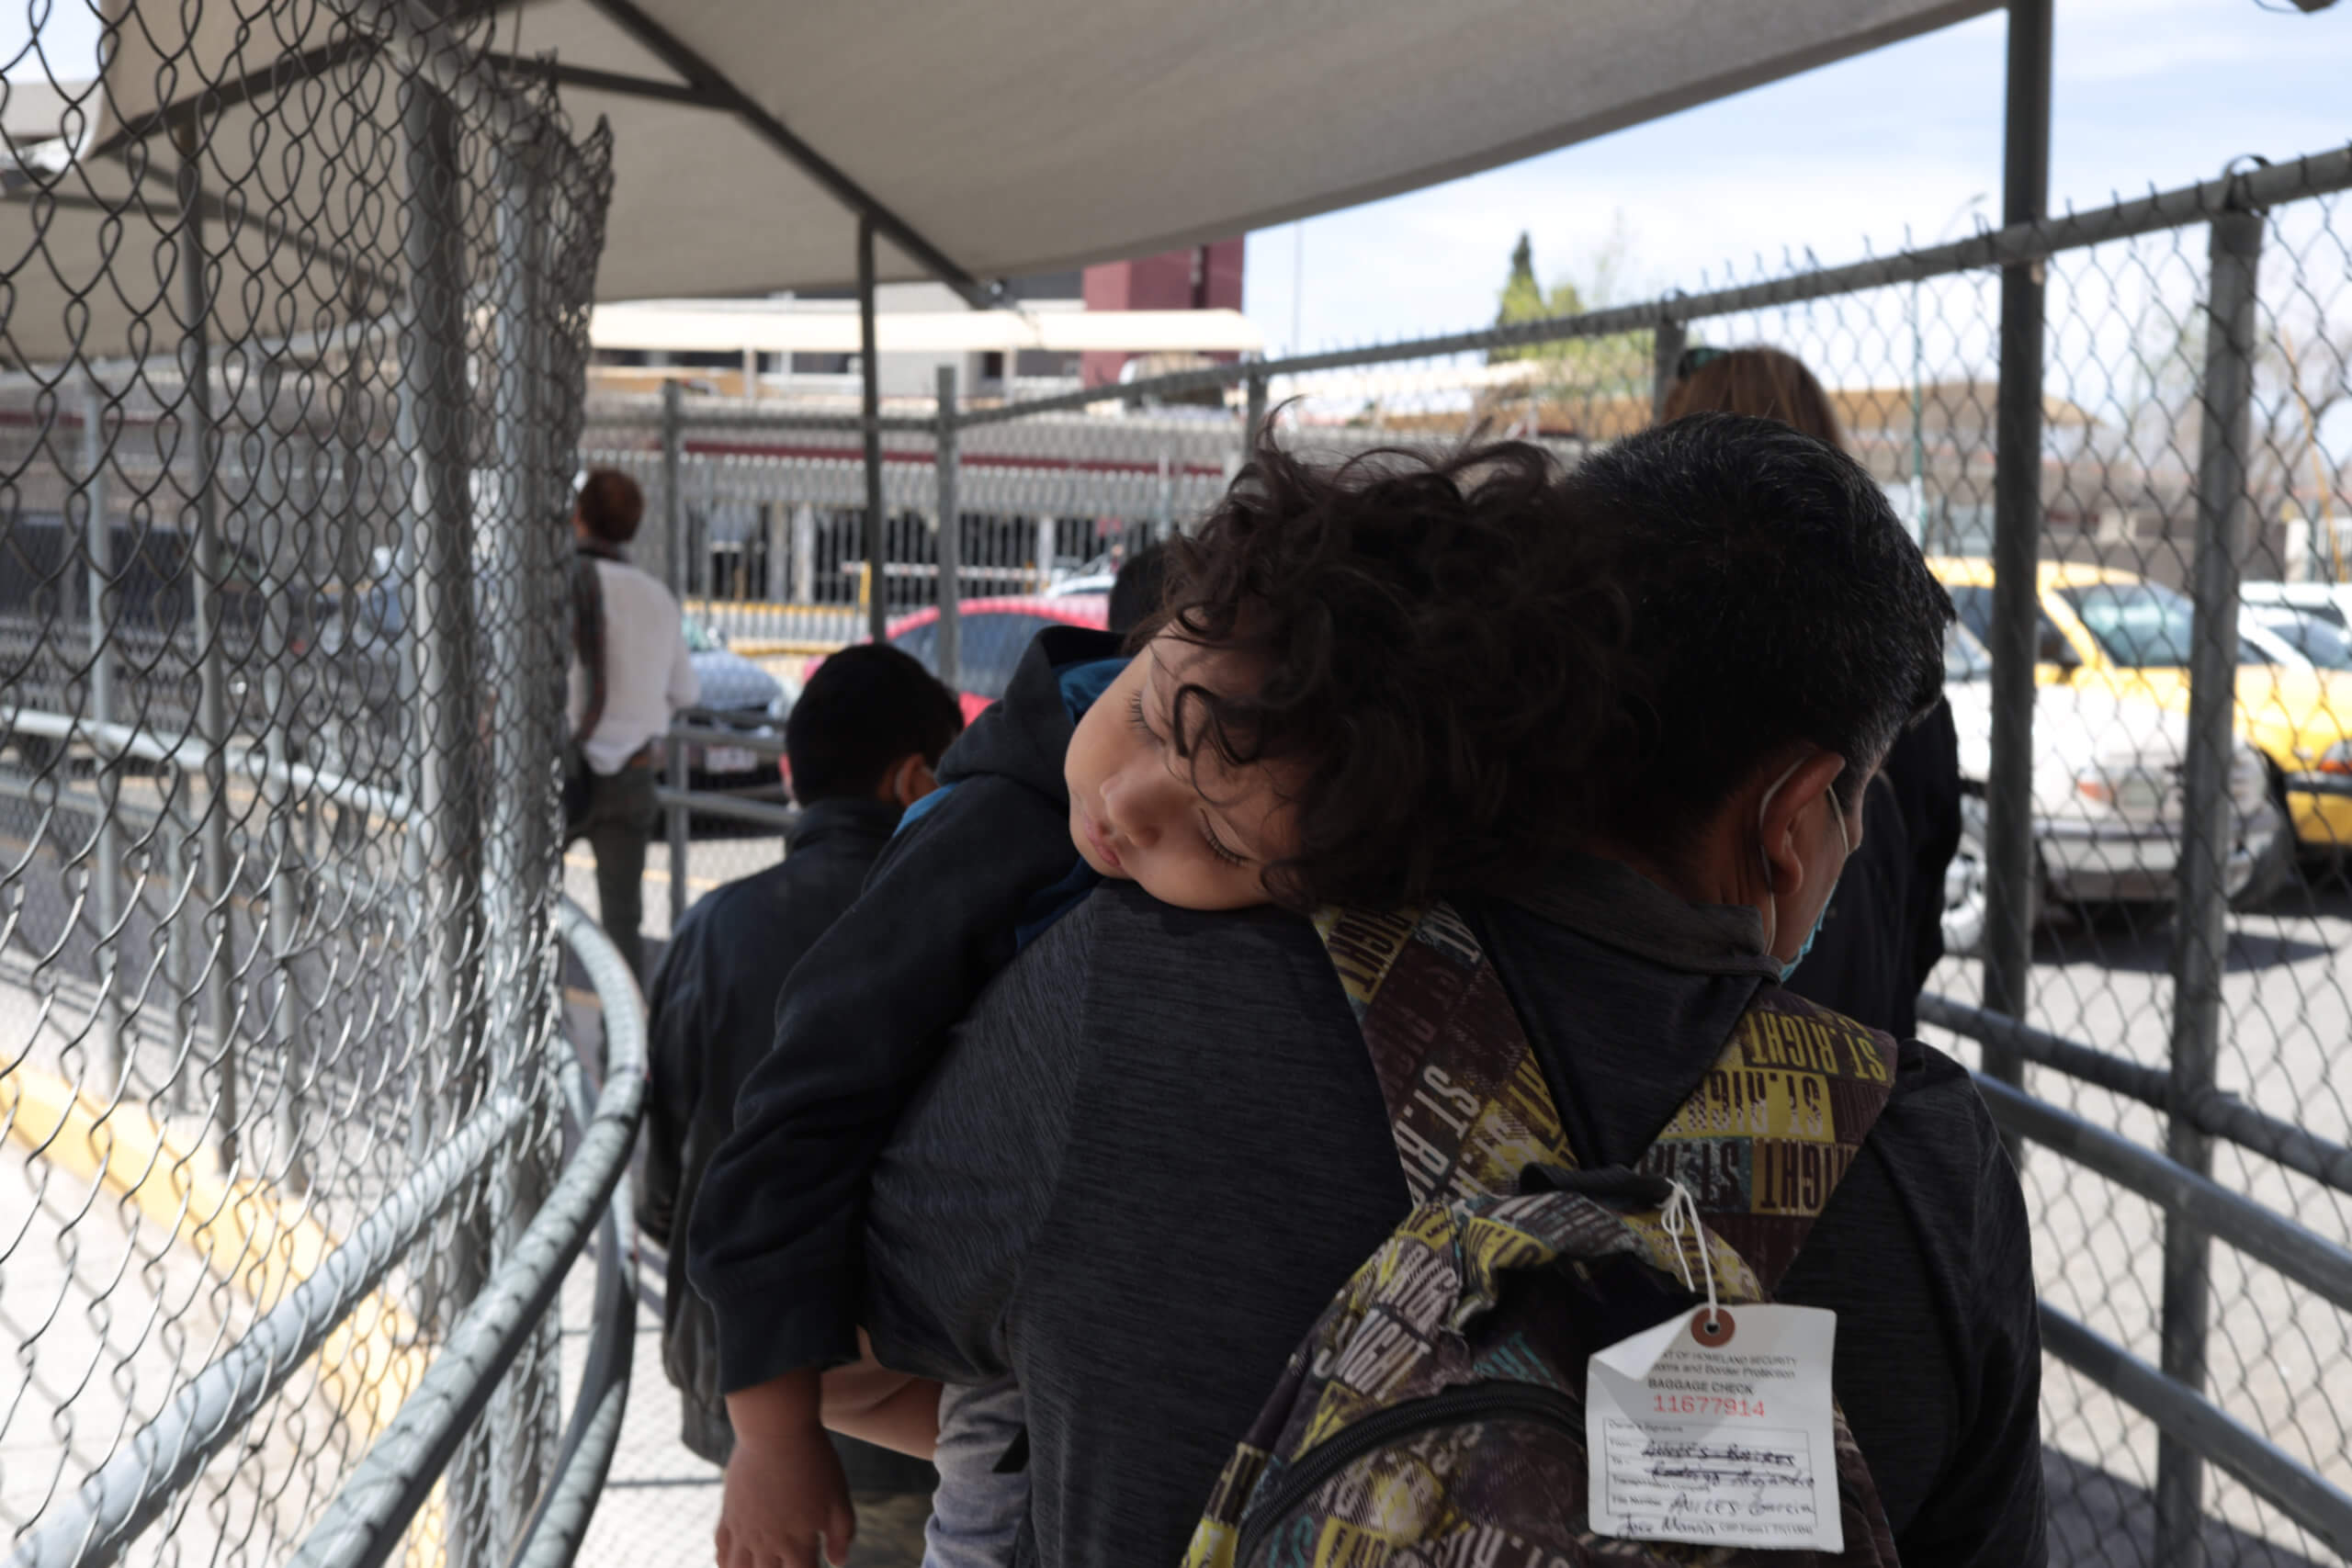 What You Need to Know About Credible Fear When Seeking Asylum